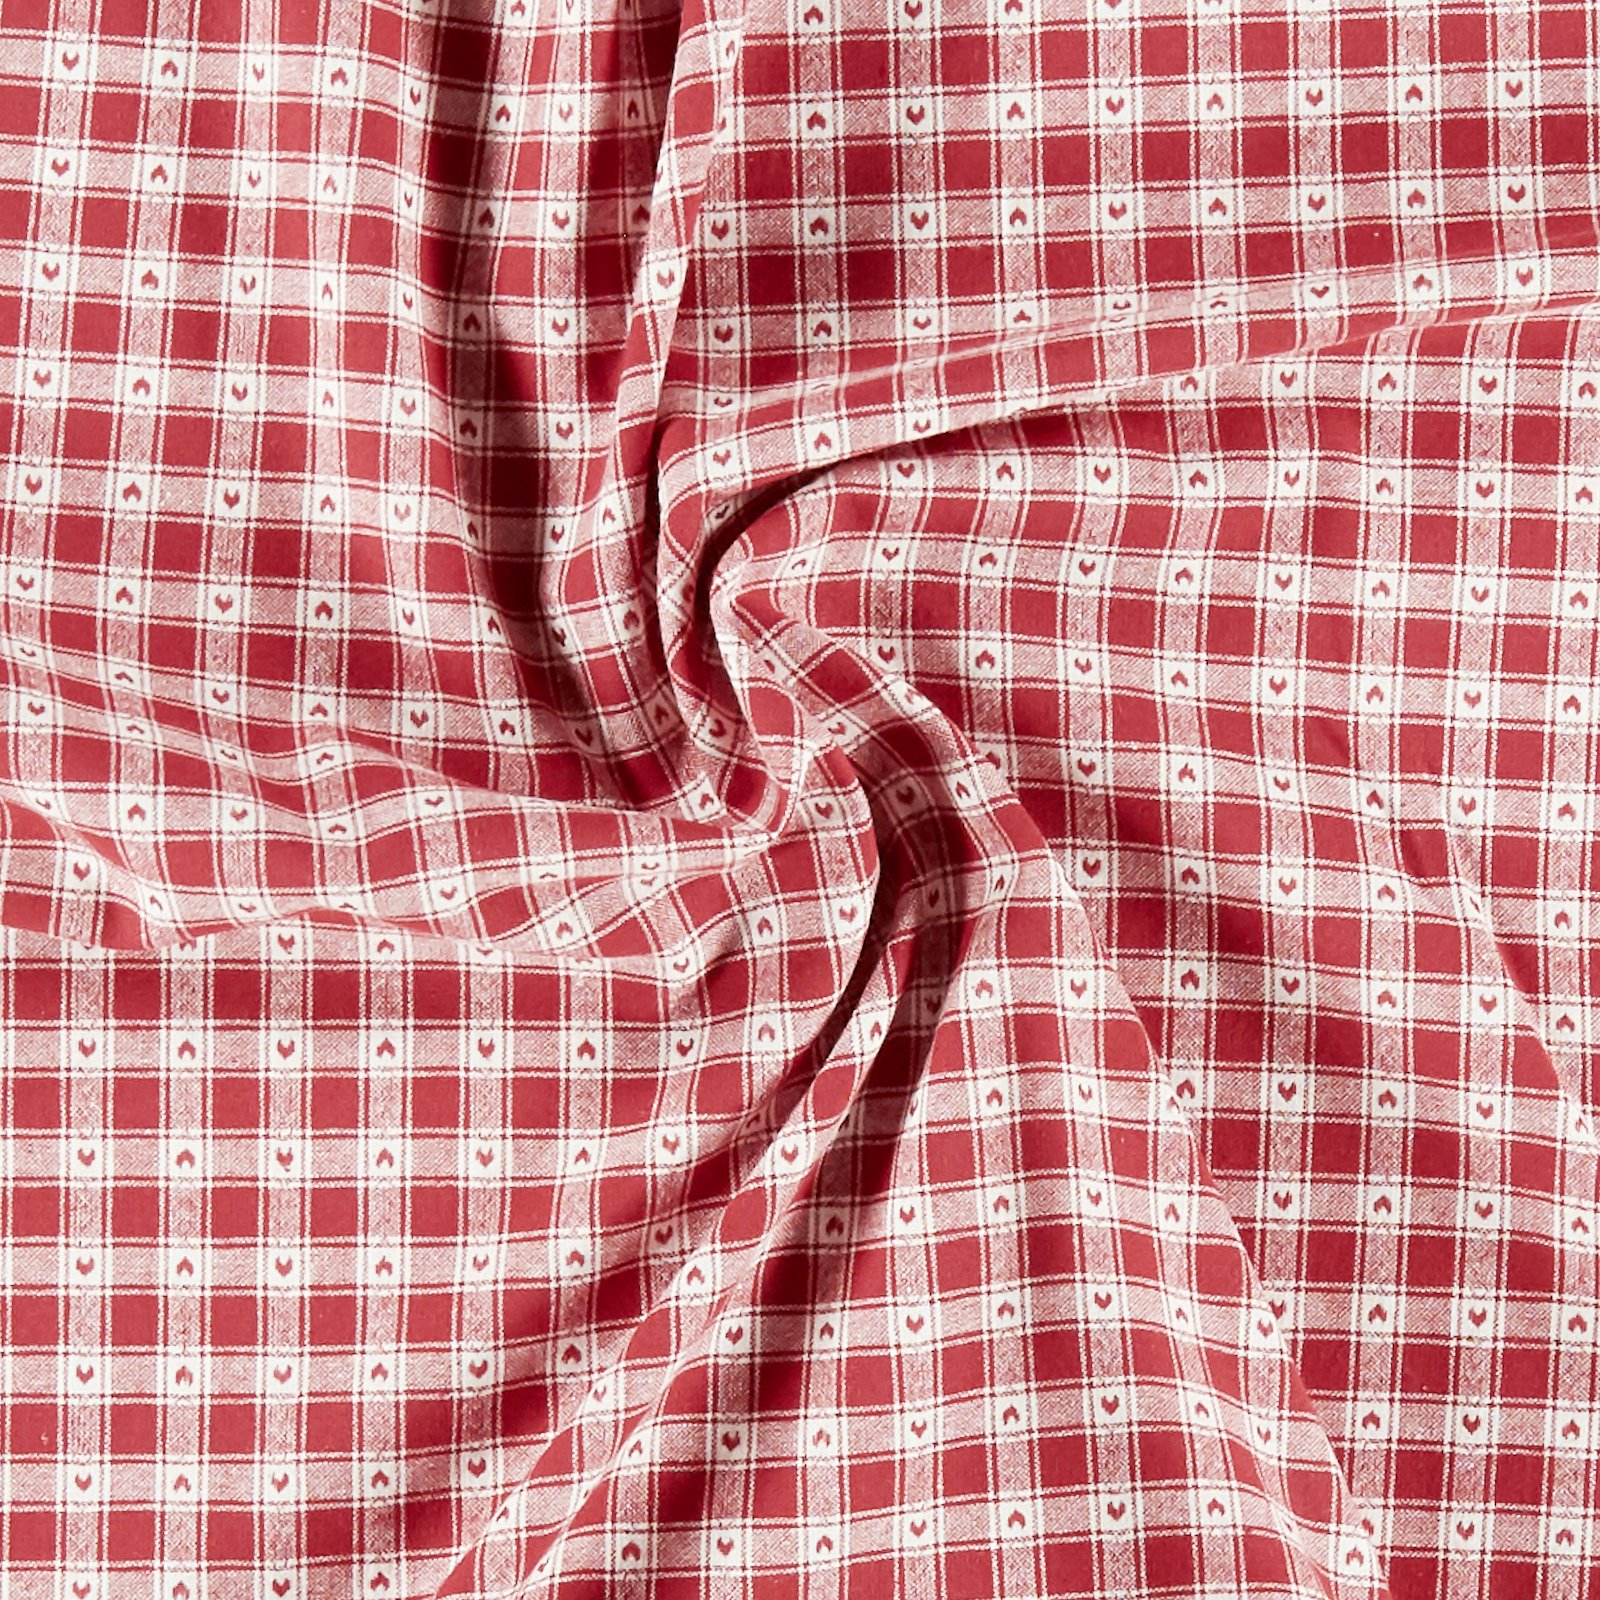 Woven cotton red/white YD check w hearts 816311_pack